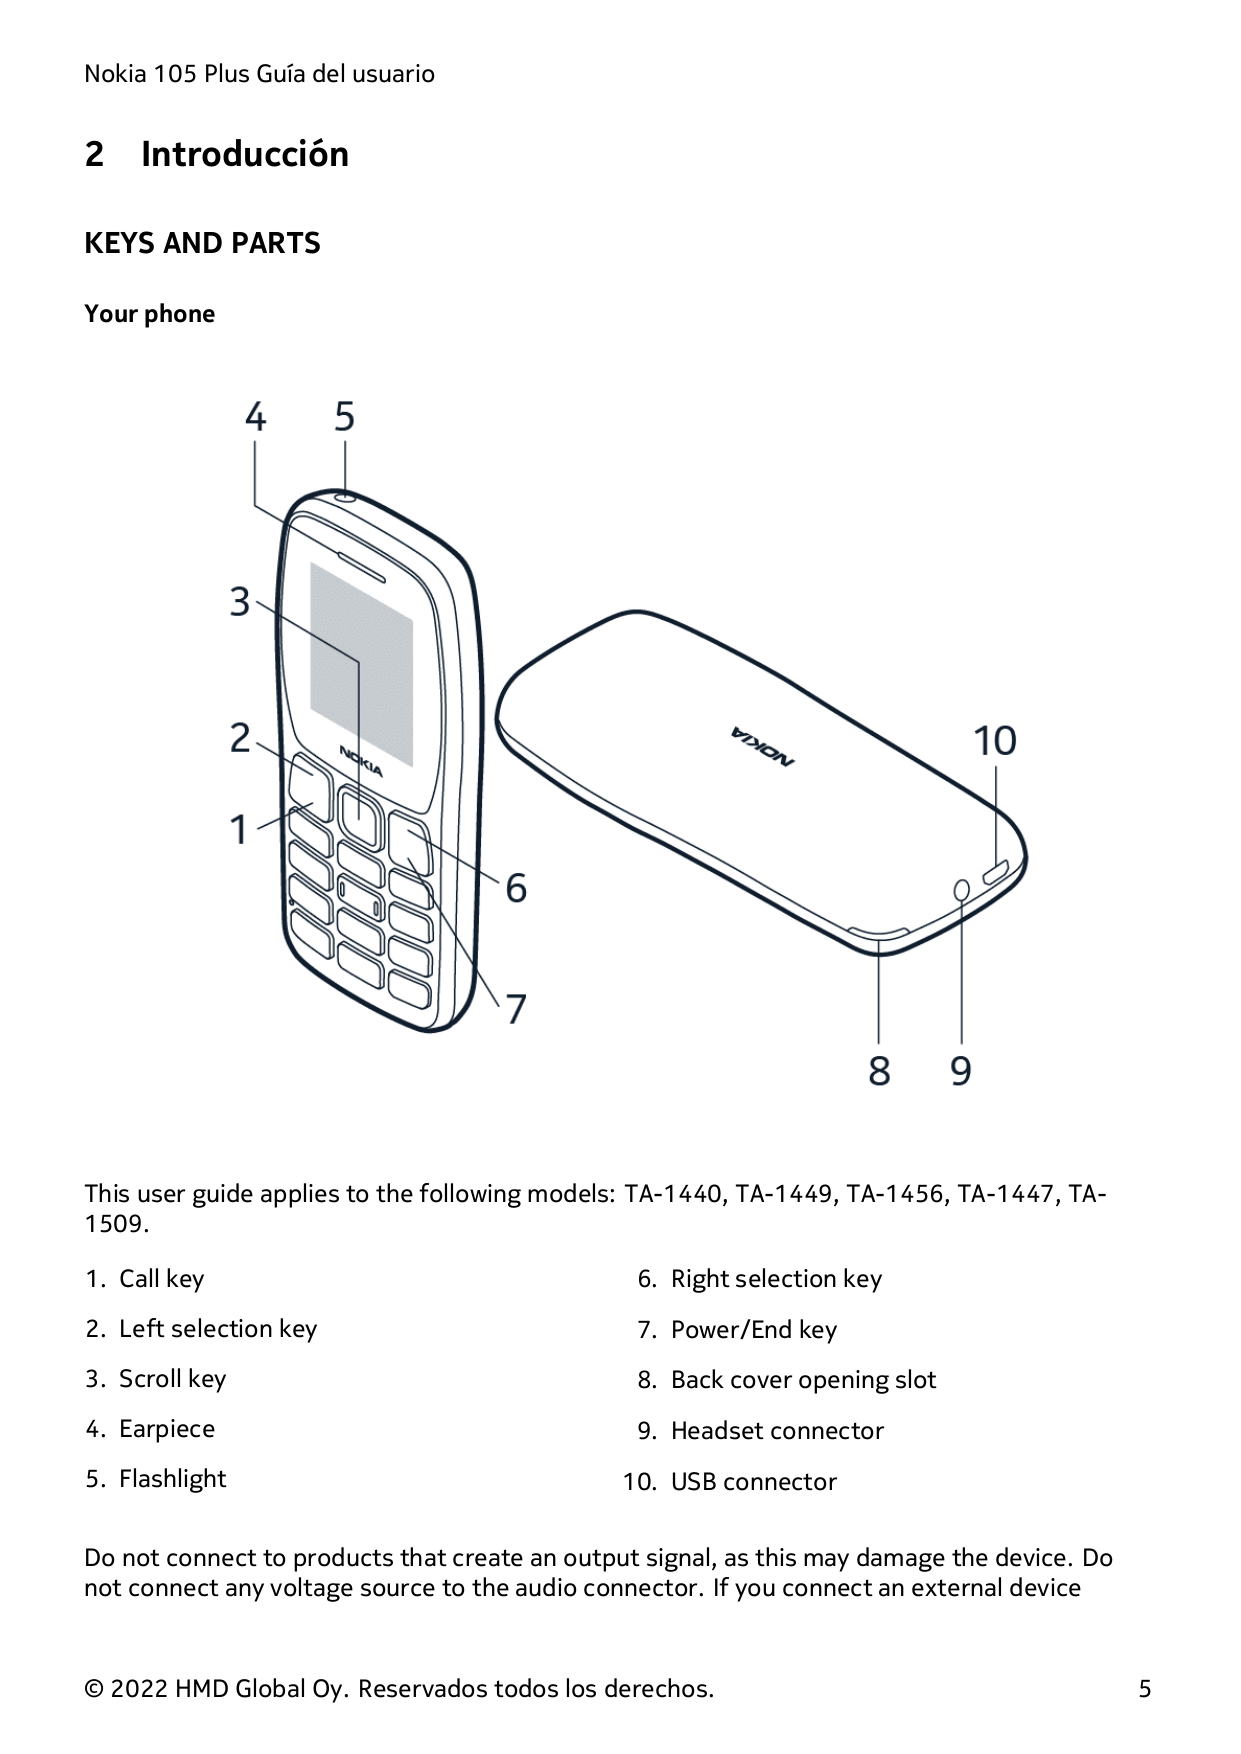 Nokia 105 Plus Guía del usuario2IntroducciónKEYS AND PARTSYour phoneThis user guide applies to the following models: TA-1440, TA